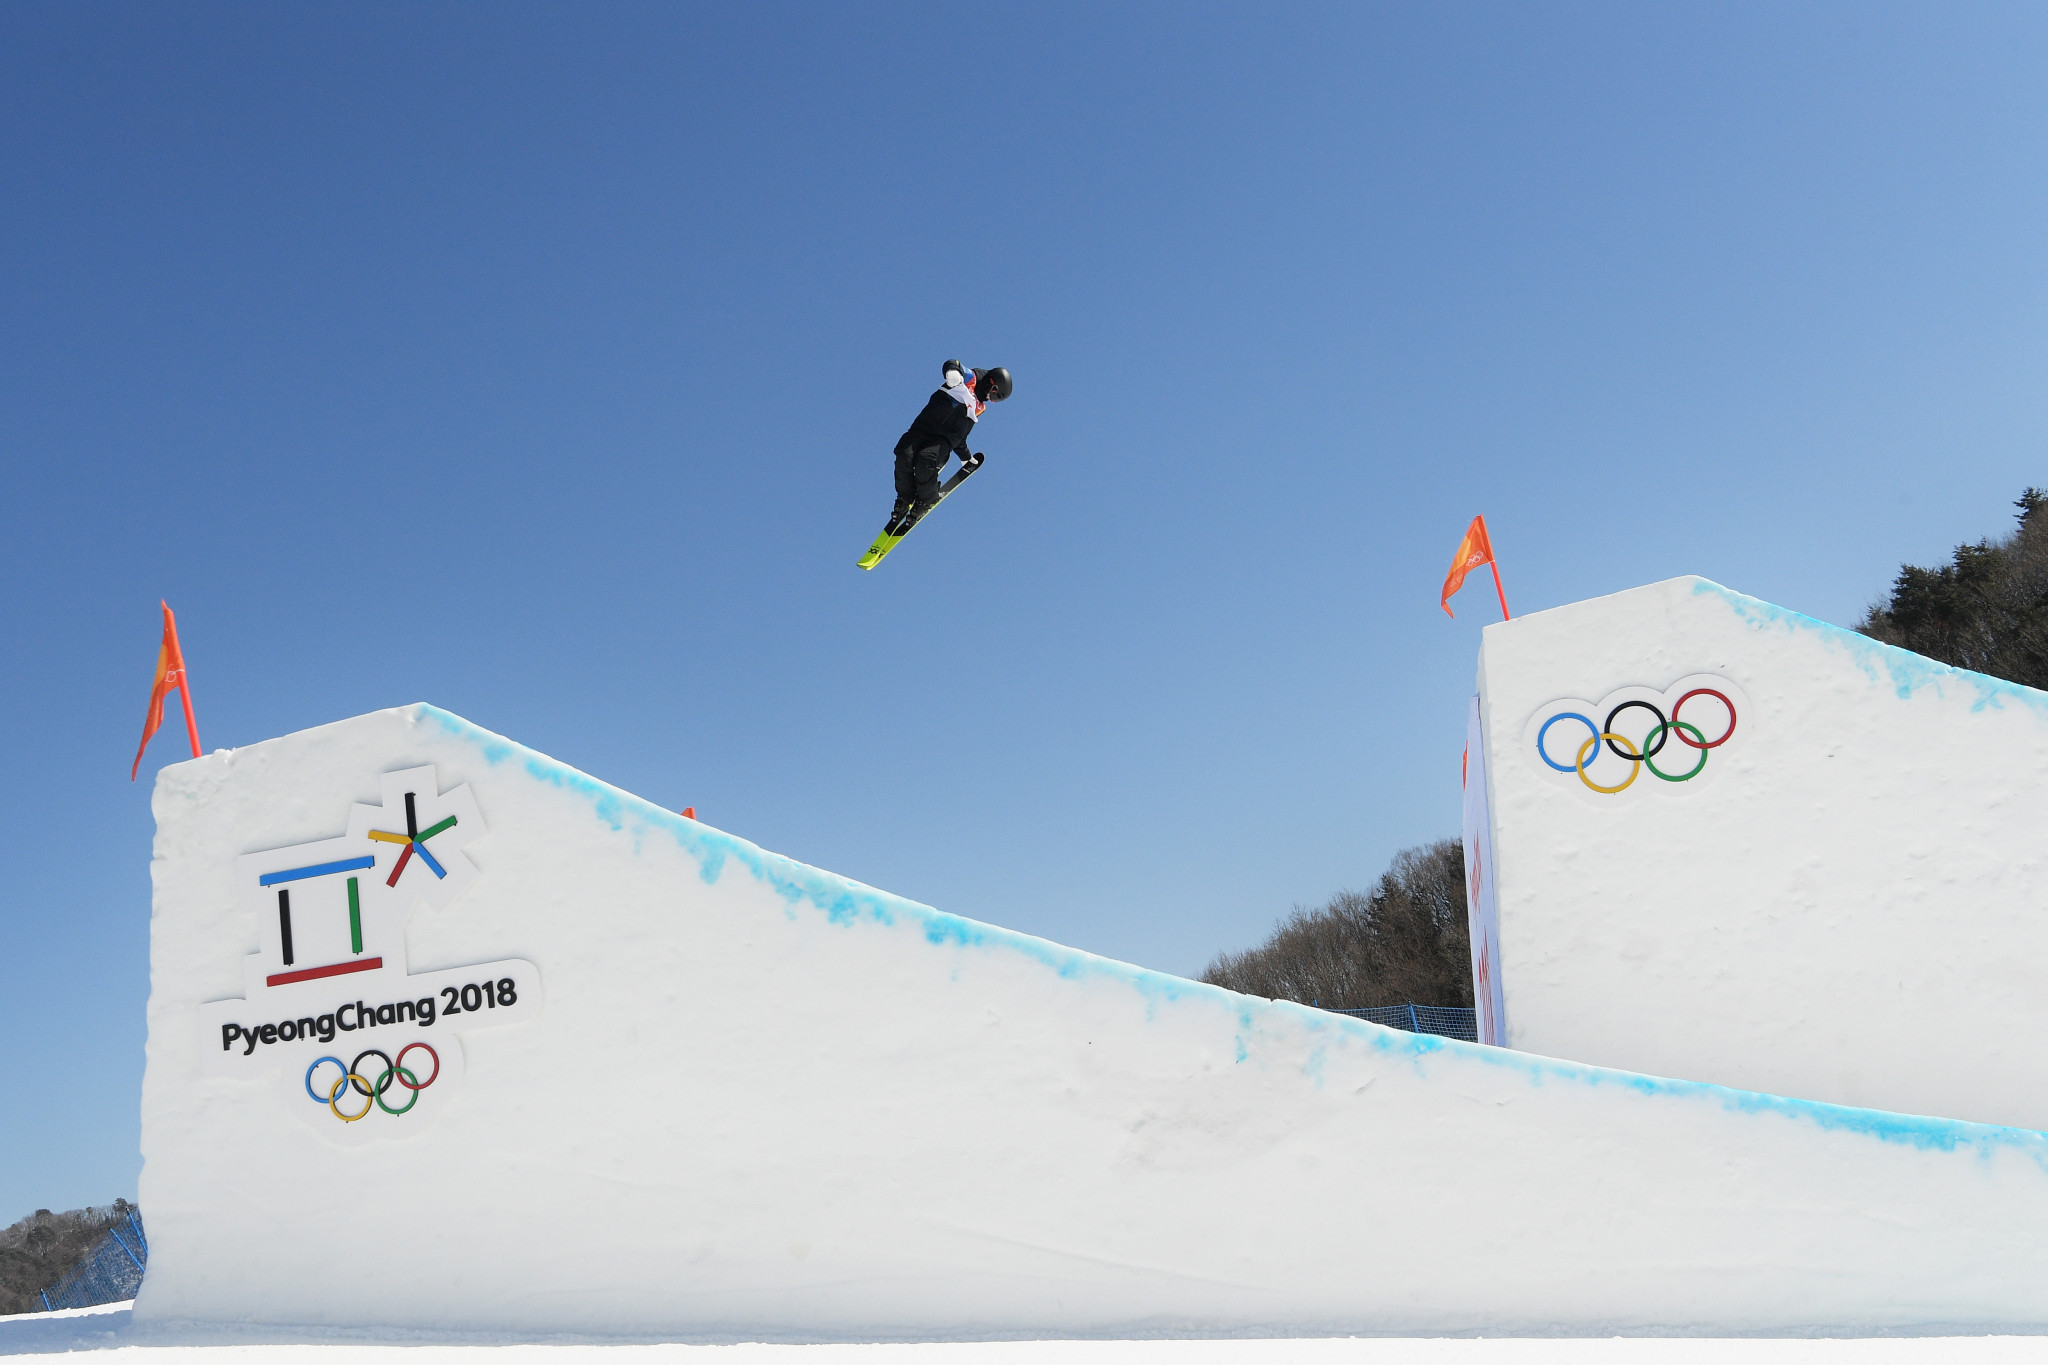 Jennie-Lee Burmansson finished eighth in the women's slopestyle final at the Pyeongchang 2018 Winter Olympic Games ©Getty Images